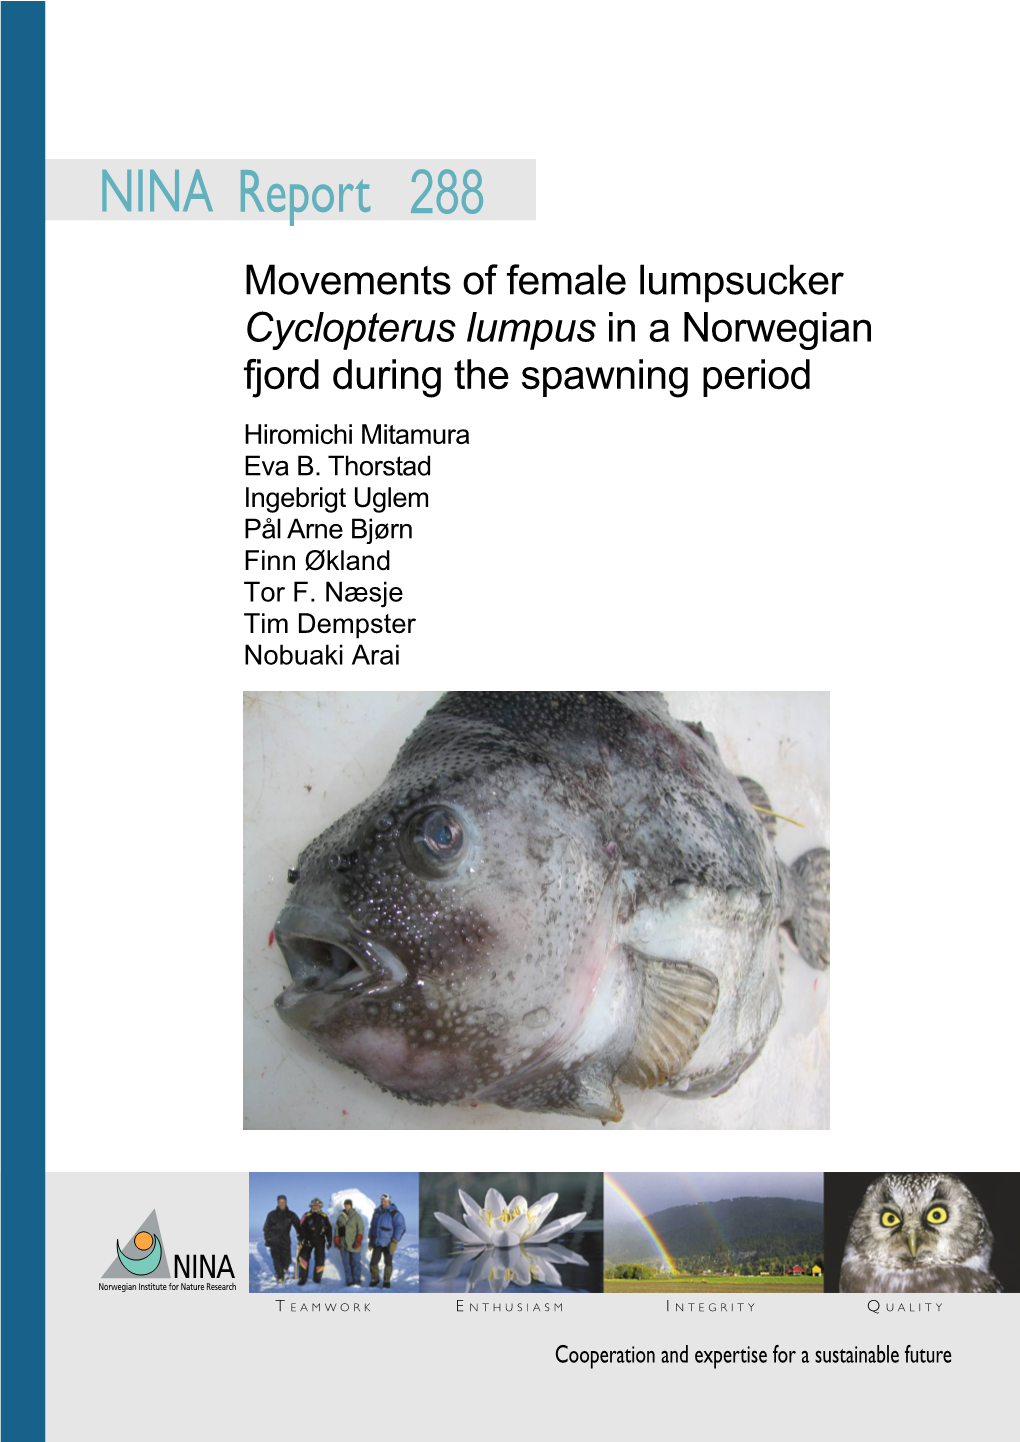 Movements of Female Lumpsucker Cyclopterus Lumpus in a Norwegian Fjord During the Spawning Period